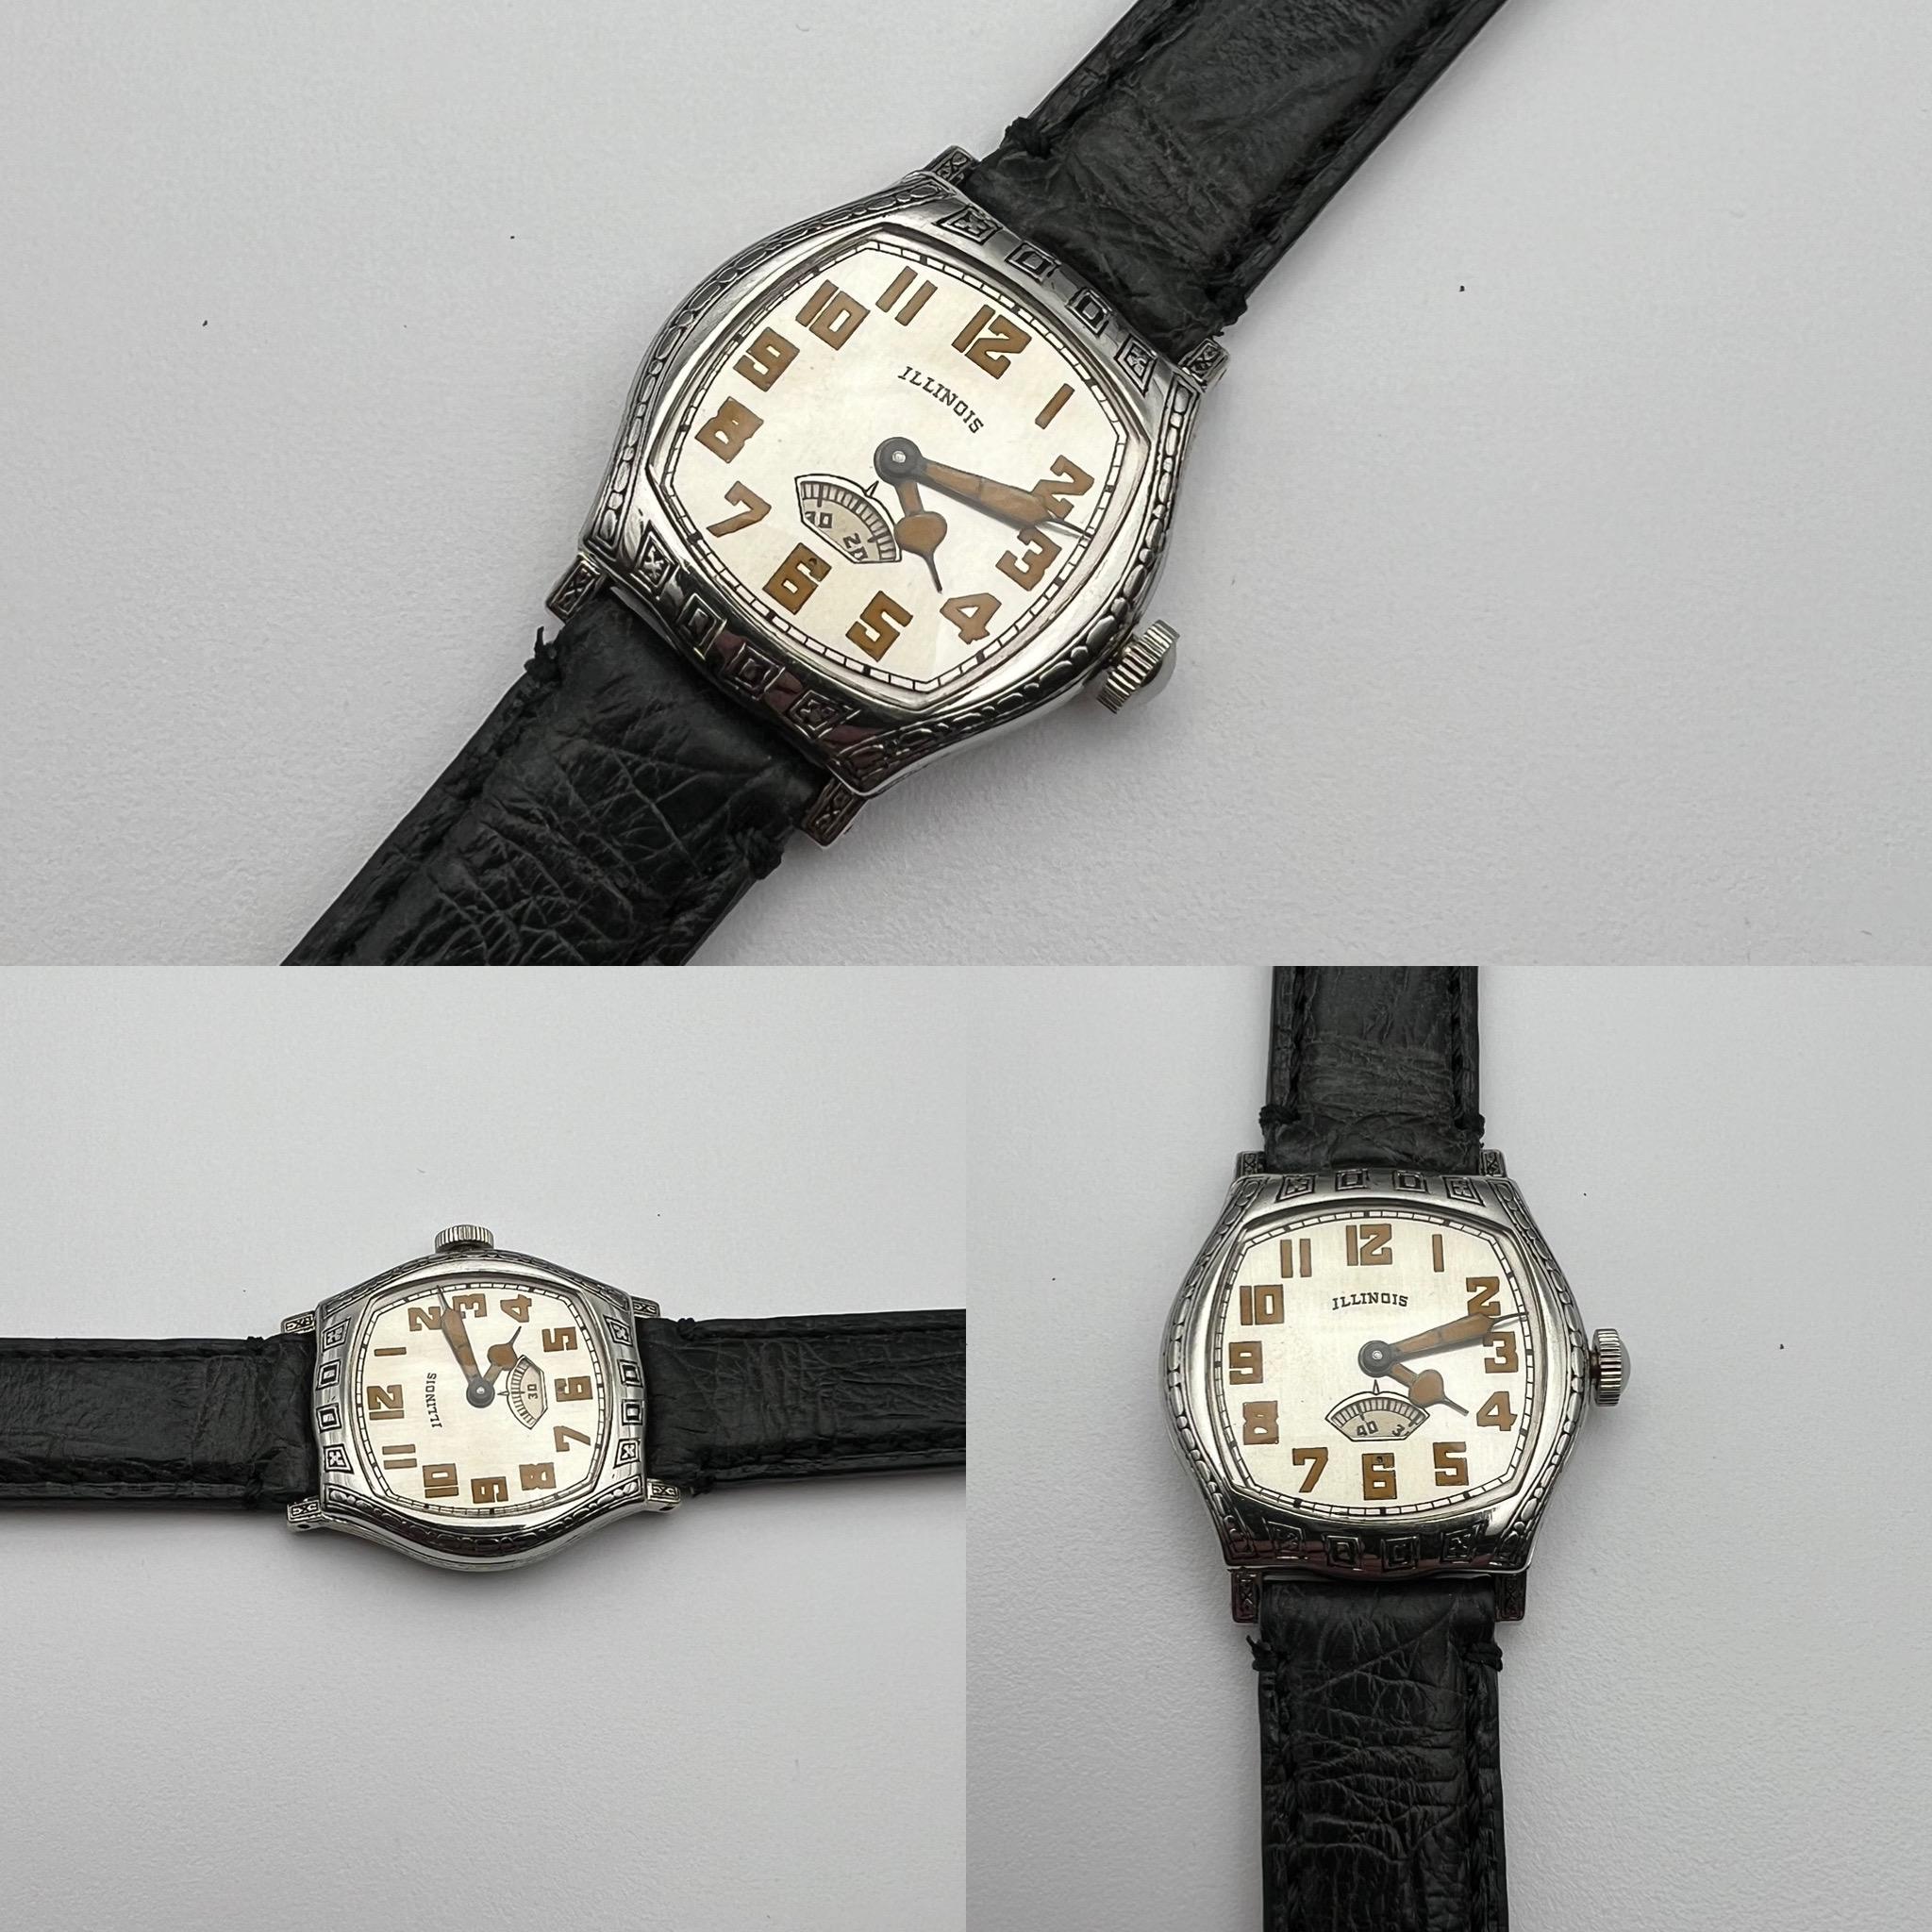 Welcome to my Vintage Watch Neighborhood. Where old watches are carefully nurtured back to health. Careful attention is paid to details and originality. A true passion of mine. 


This is an Illinois  Guardian model wristwatch. This is another